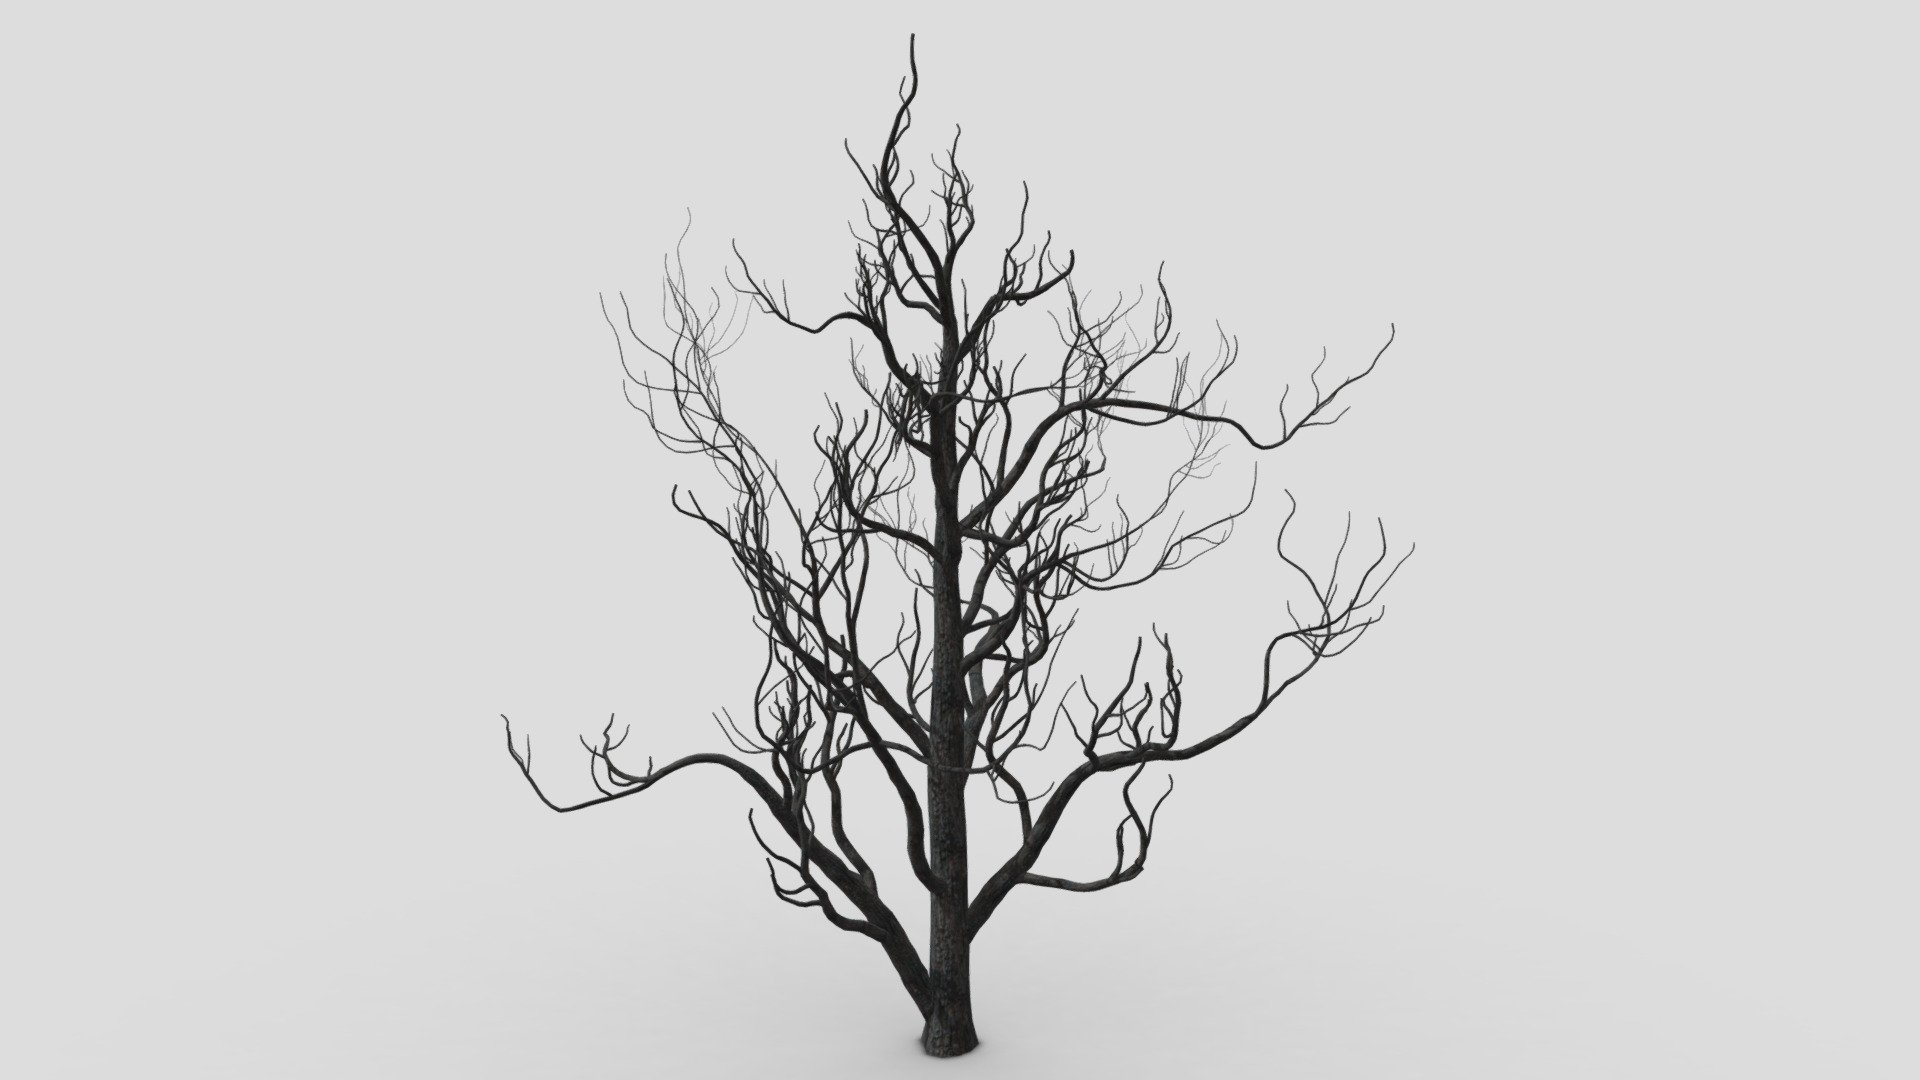 I Try to provide this kind of tree to use in your game and other project. I hope it will be useful for you 3d model